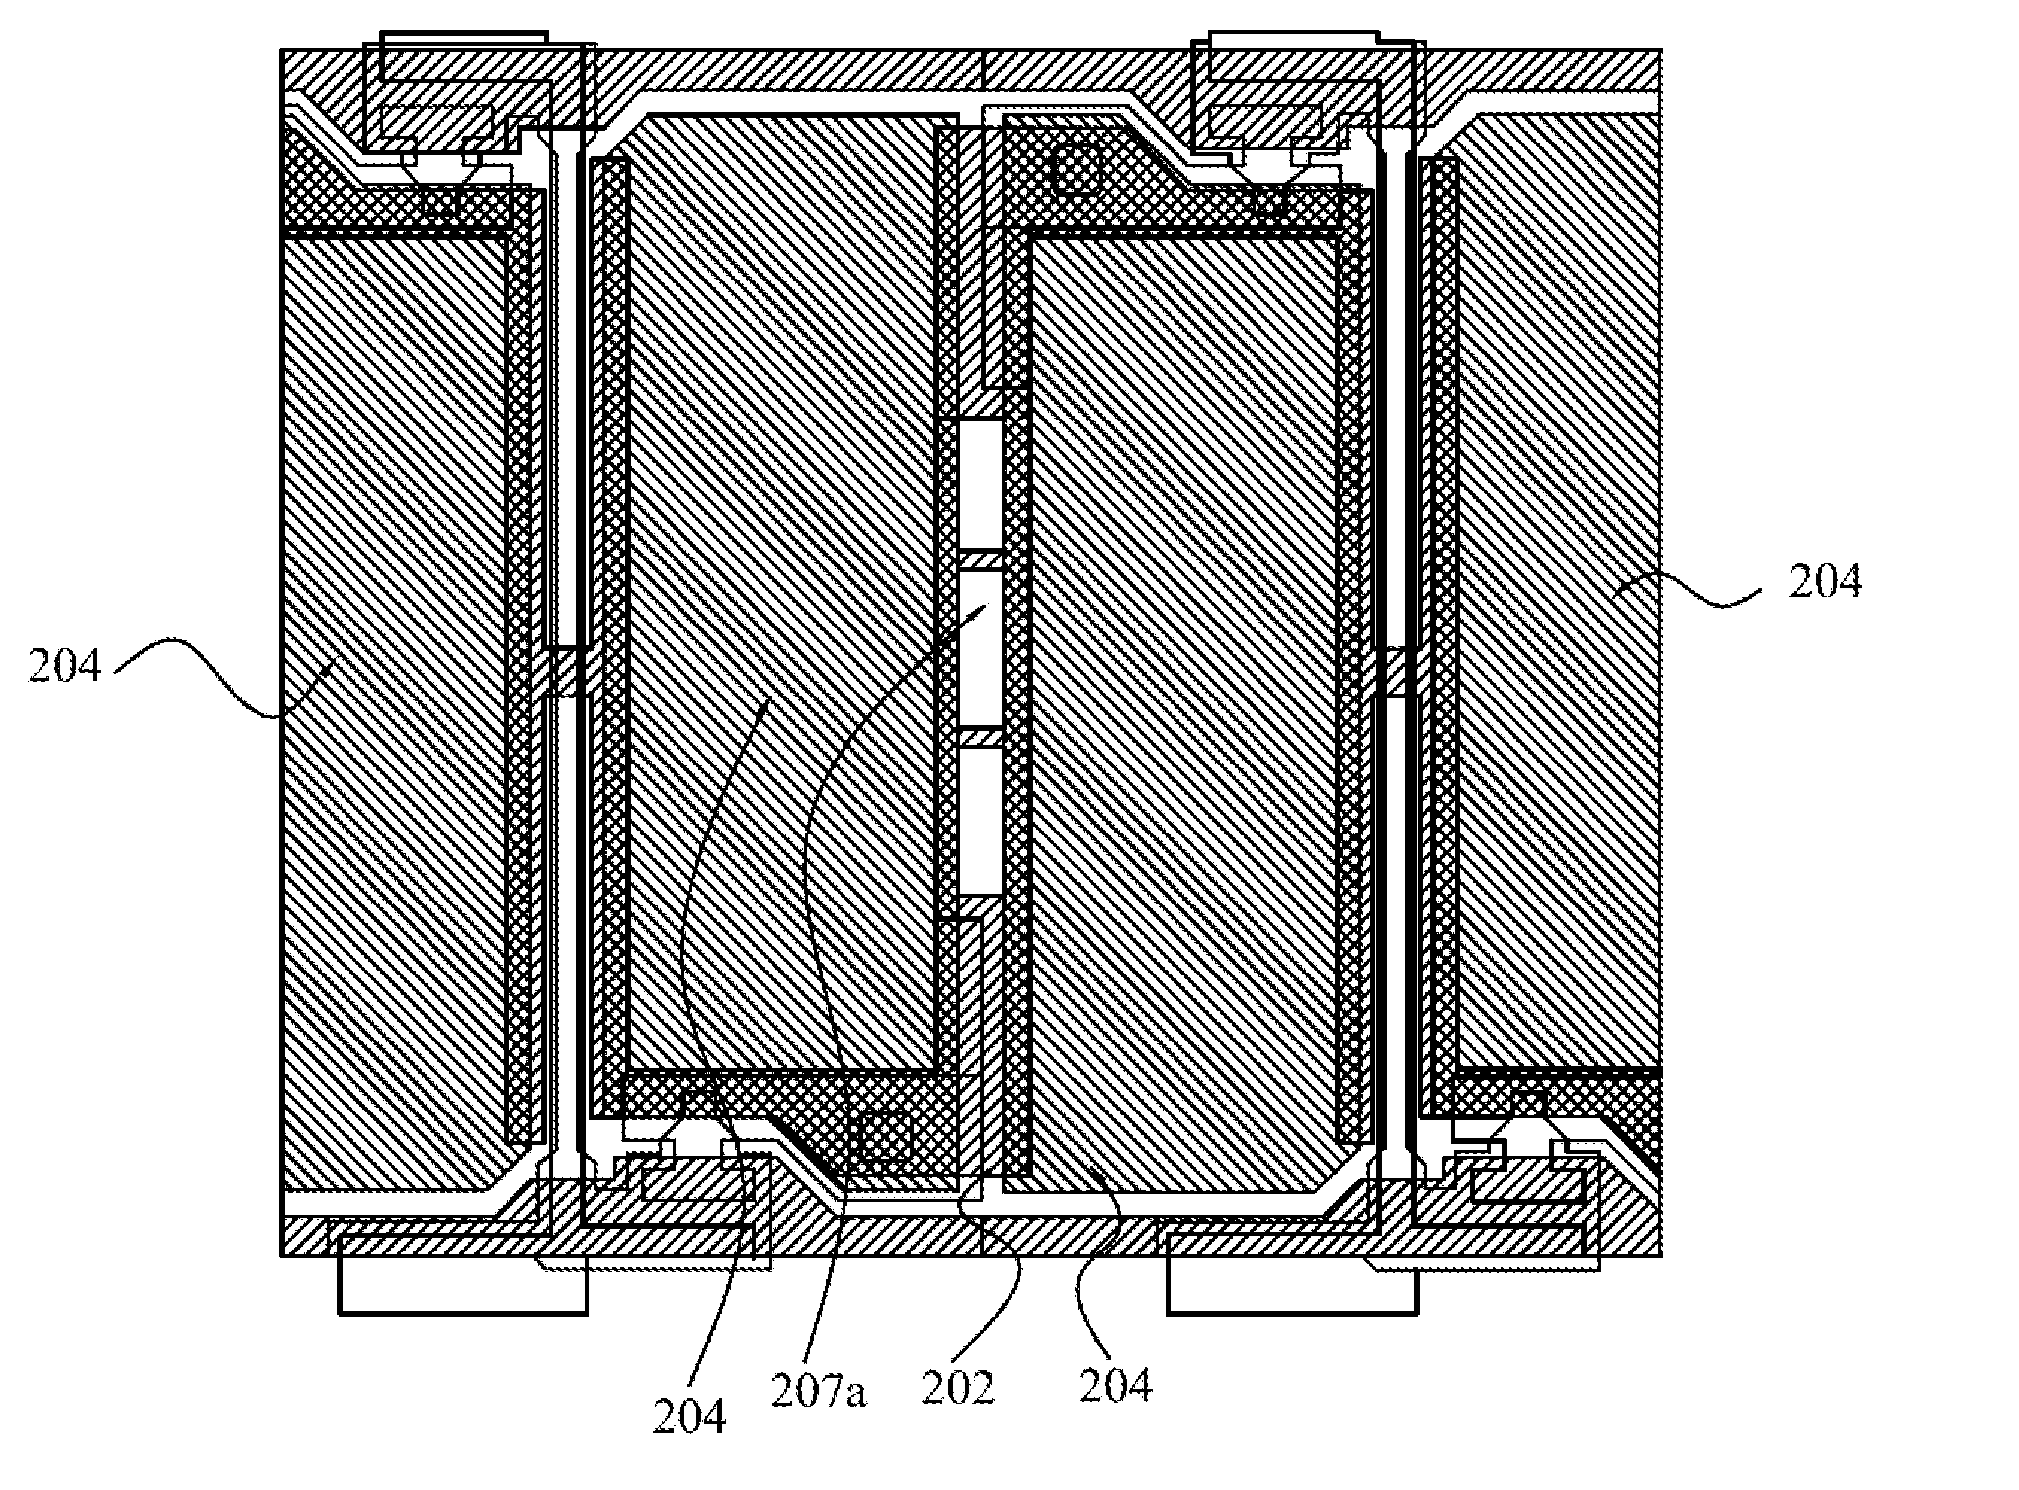 Liquid Crystal Display Device with Repairable Structure